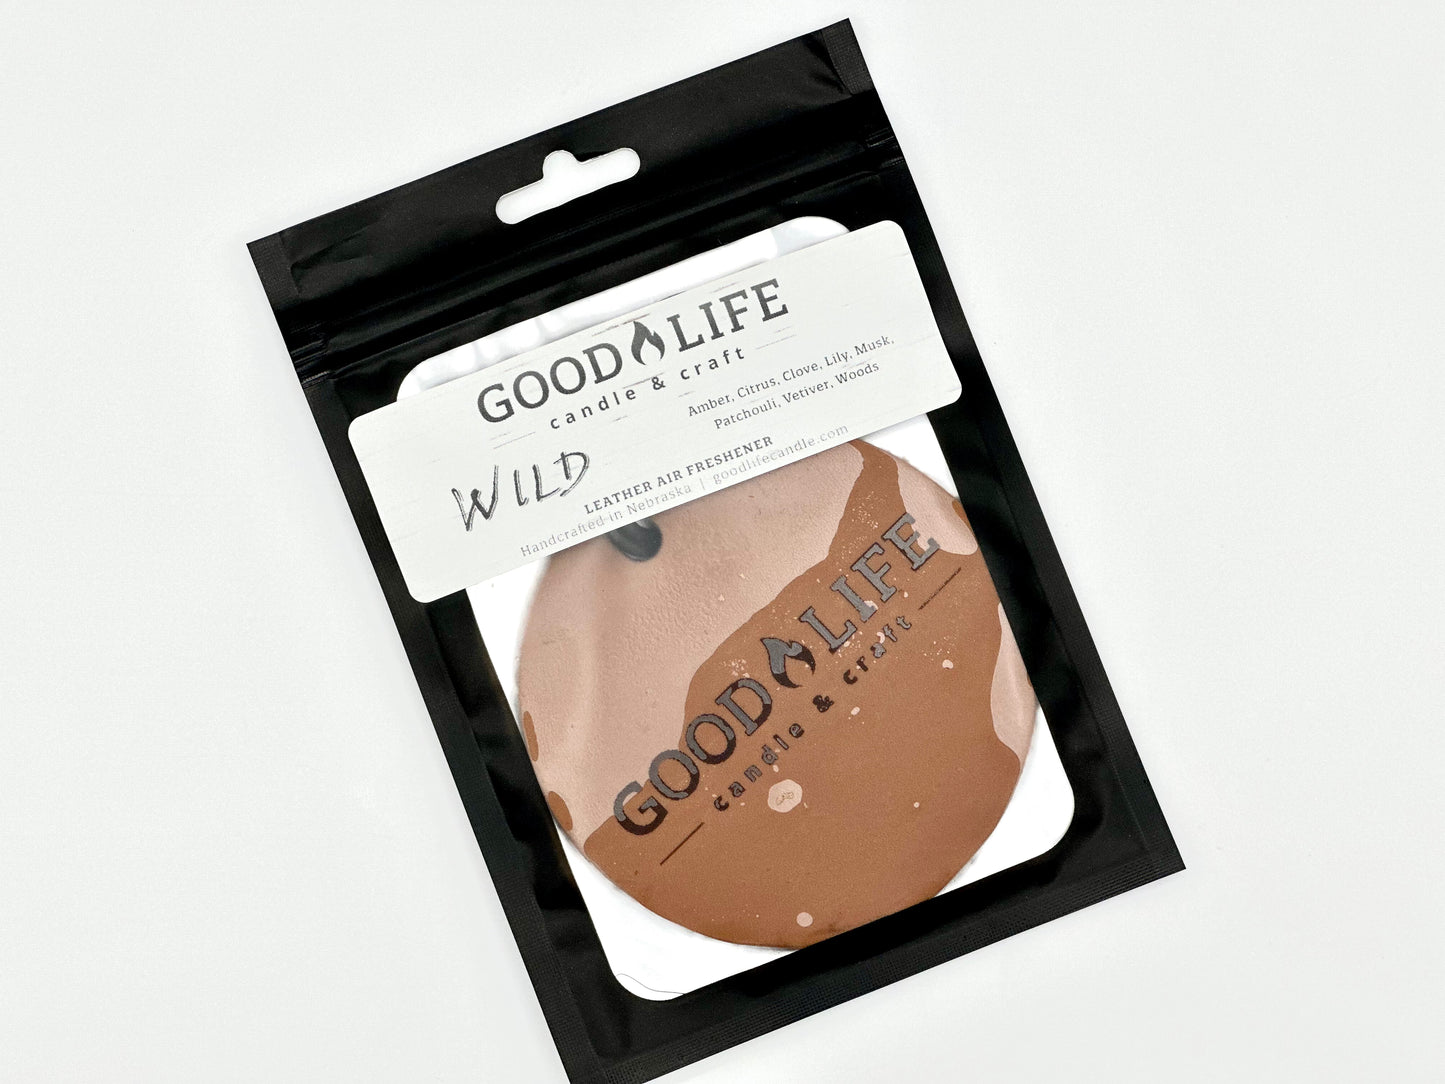 Wild Scented Leather Air Freshener